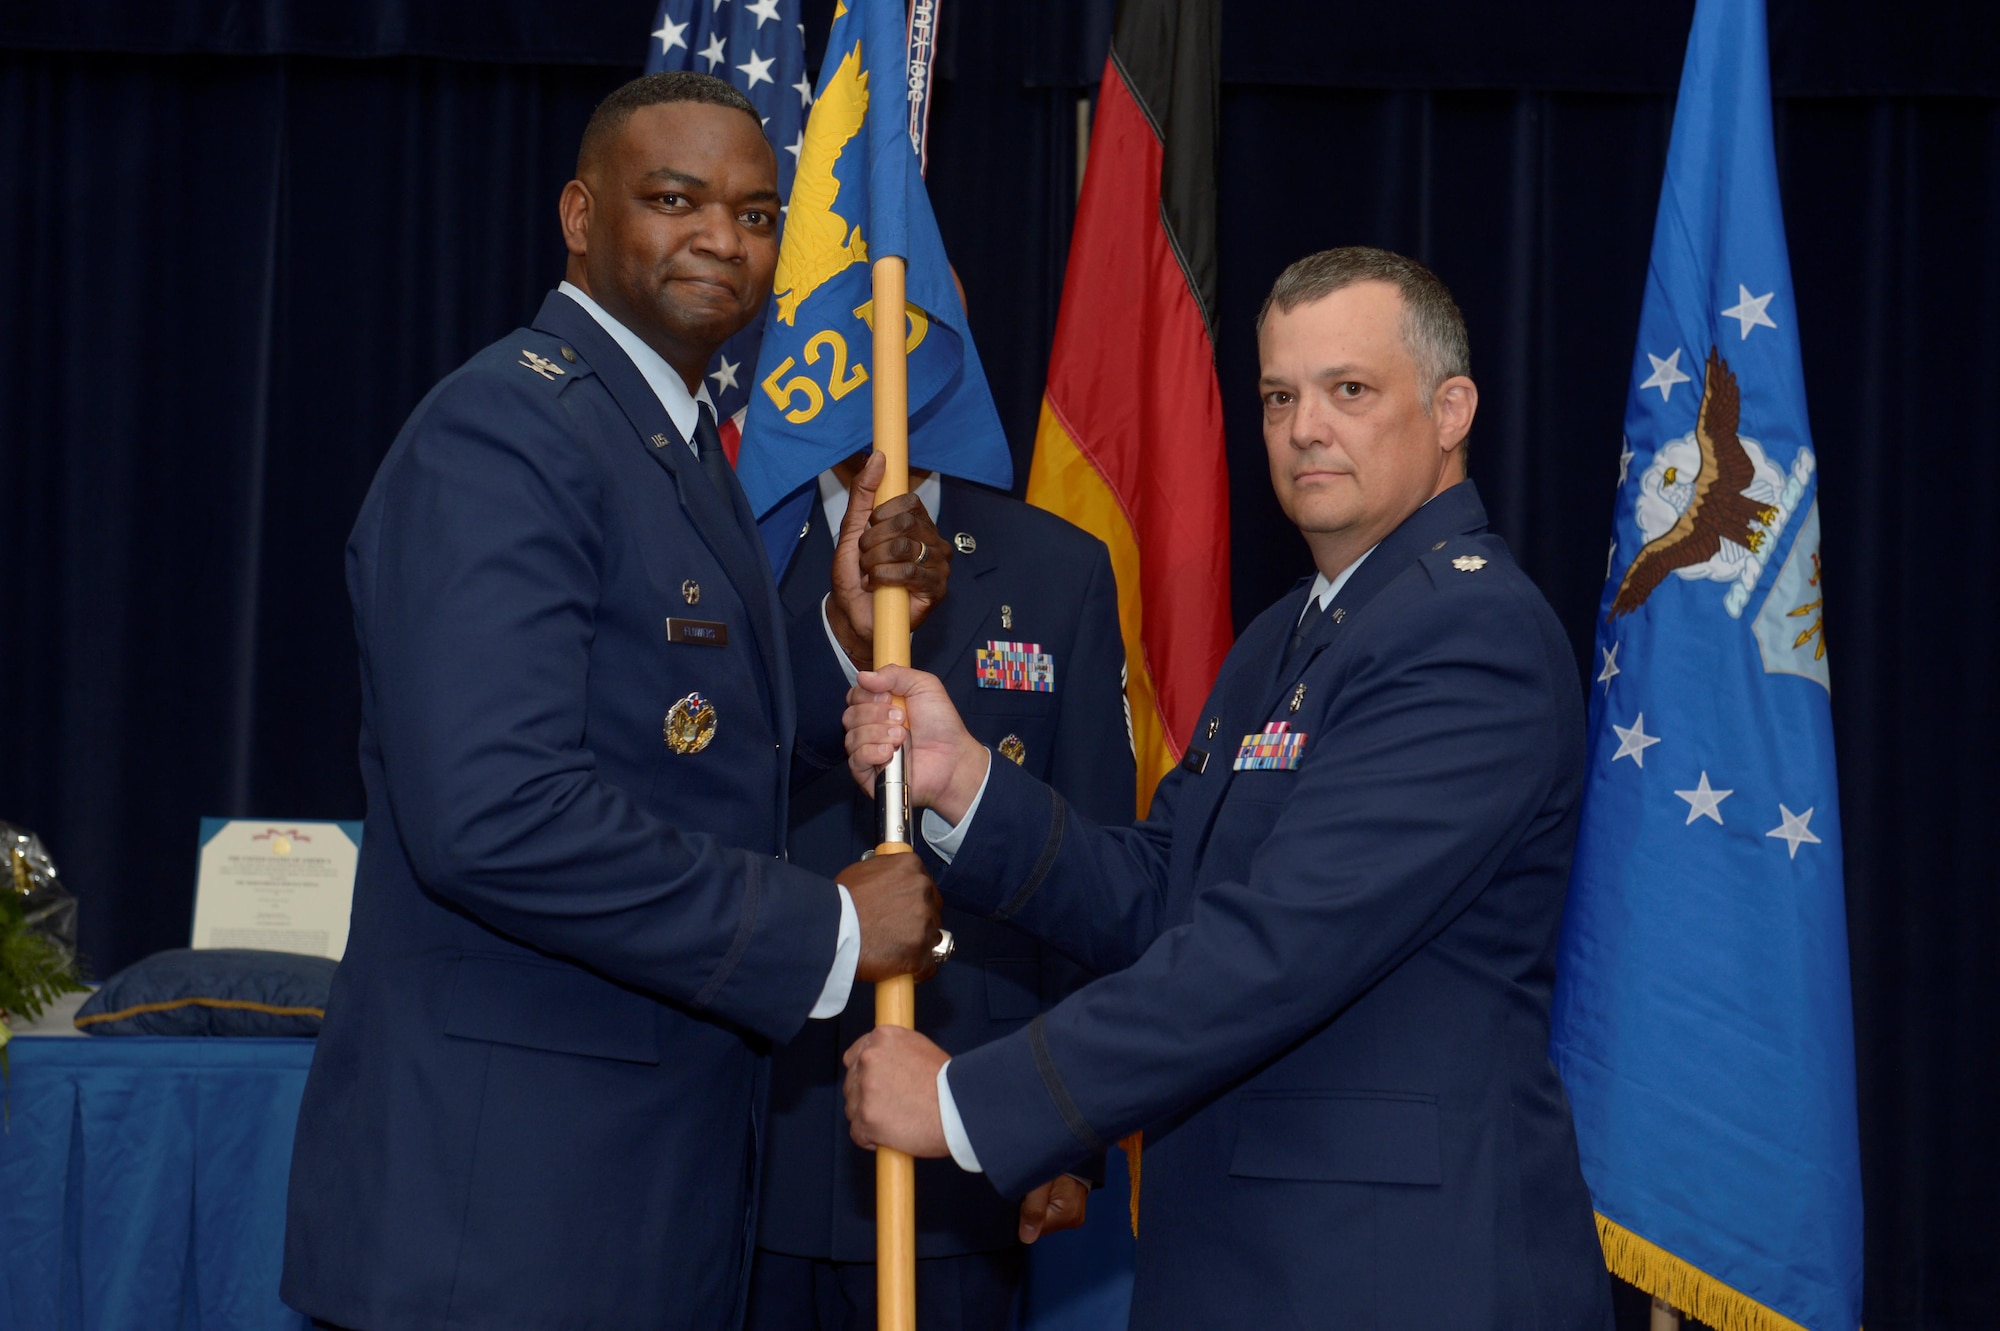 U.S. Air Force Col. Alfred Flowers, 52nd Medical Group commander, left, gives the ceremonial guidon to U.S. Air Force Lt. Col. David Jones, incoming 52nd Dental Squadron
commander, during the 52nd DS change of command ceremony on Spangdahlem Air Base, Germany, July 11, 2016. (U.S. Air Force photo by Staff Sgt. Jonathan Snyder/Released)